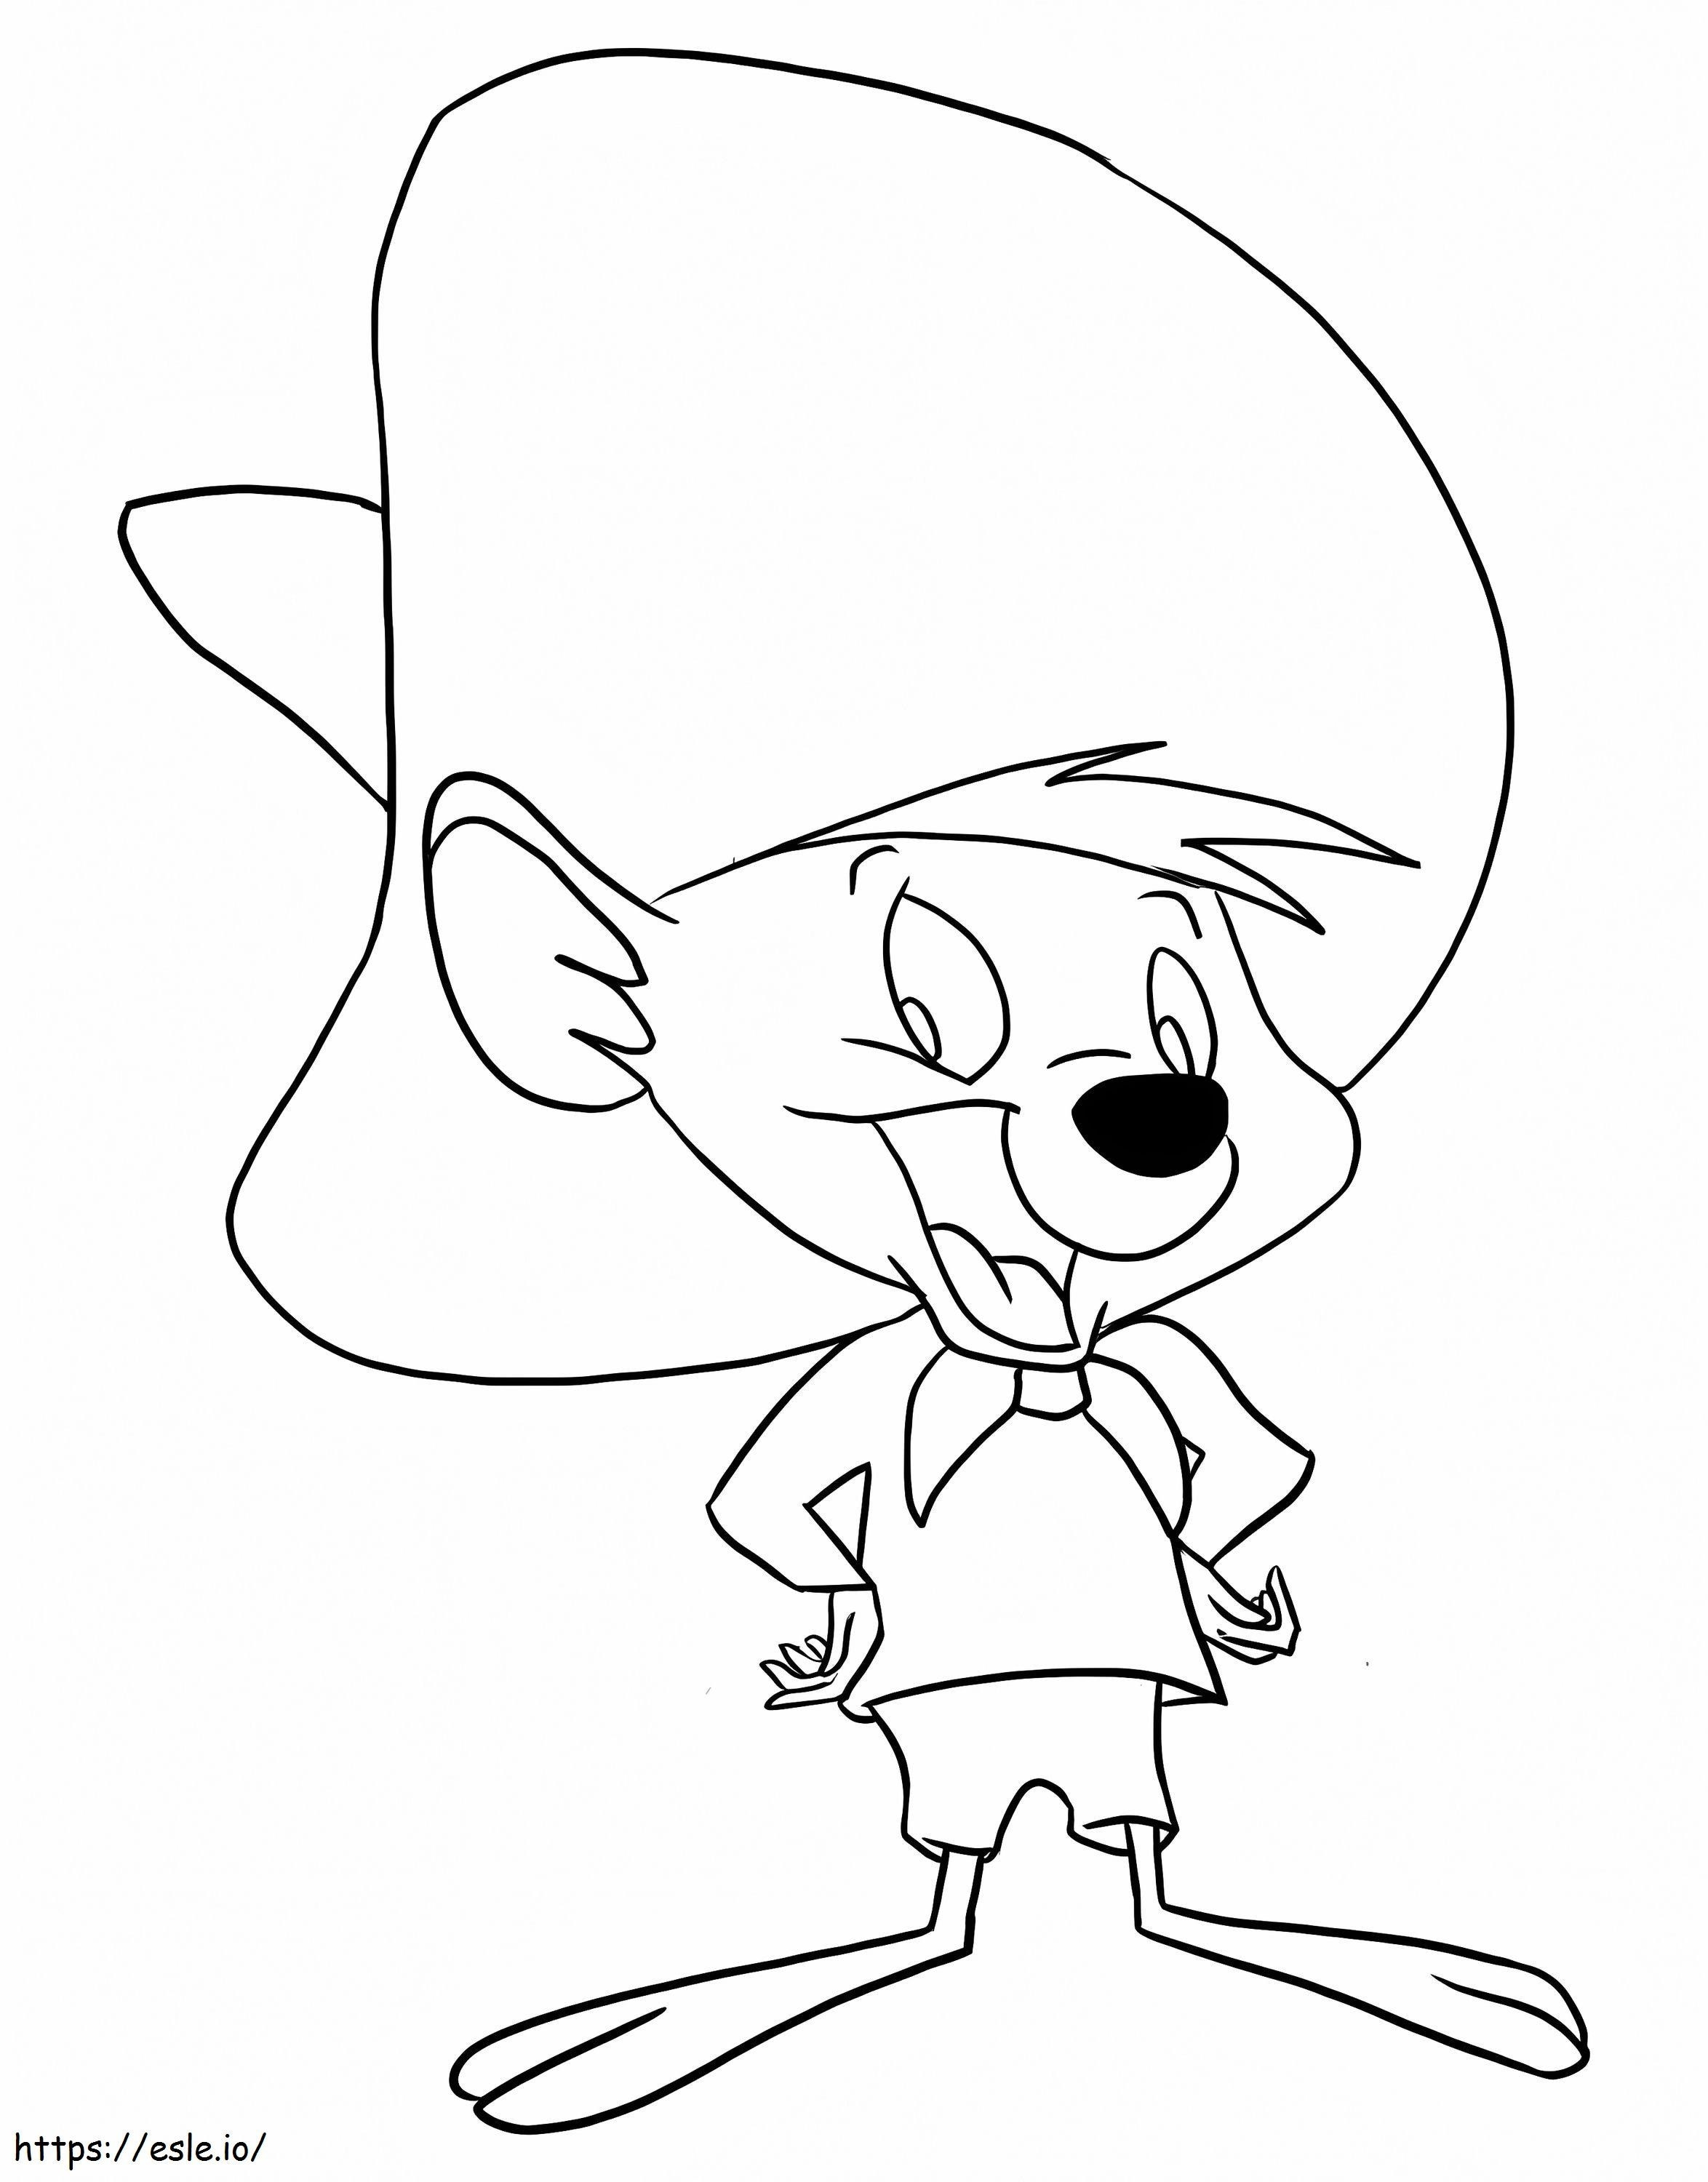 Friendly Speedy Gonzales coloring page